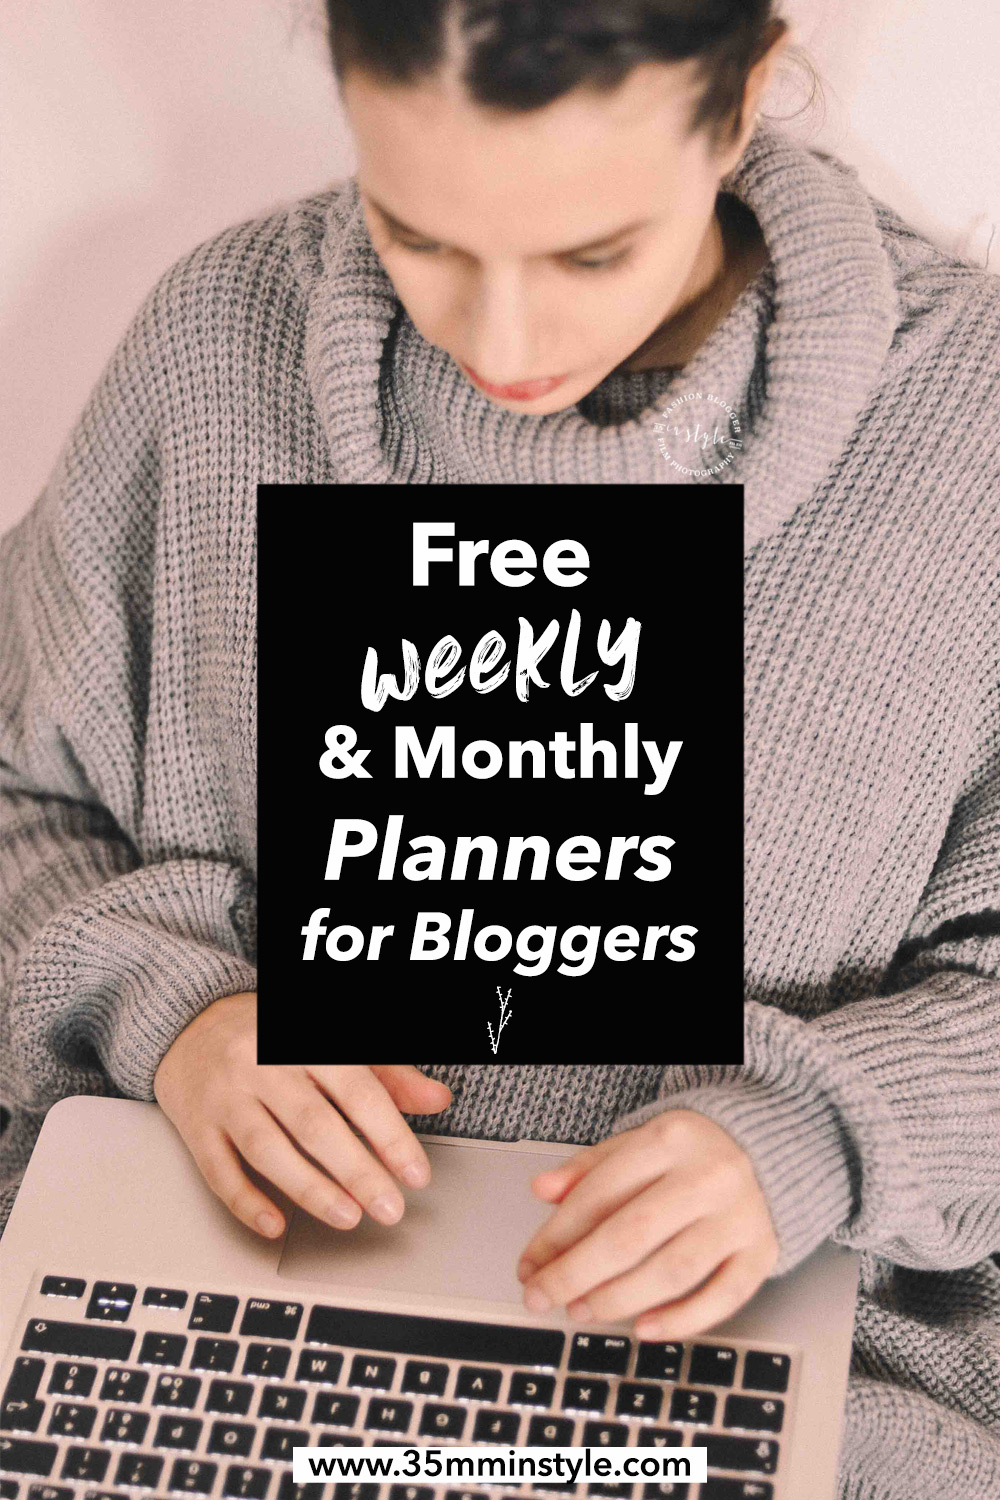 Free Weekly & Monthly Planner for Bloggers 35mminstyle